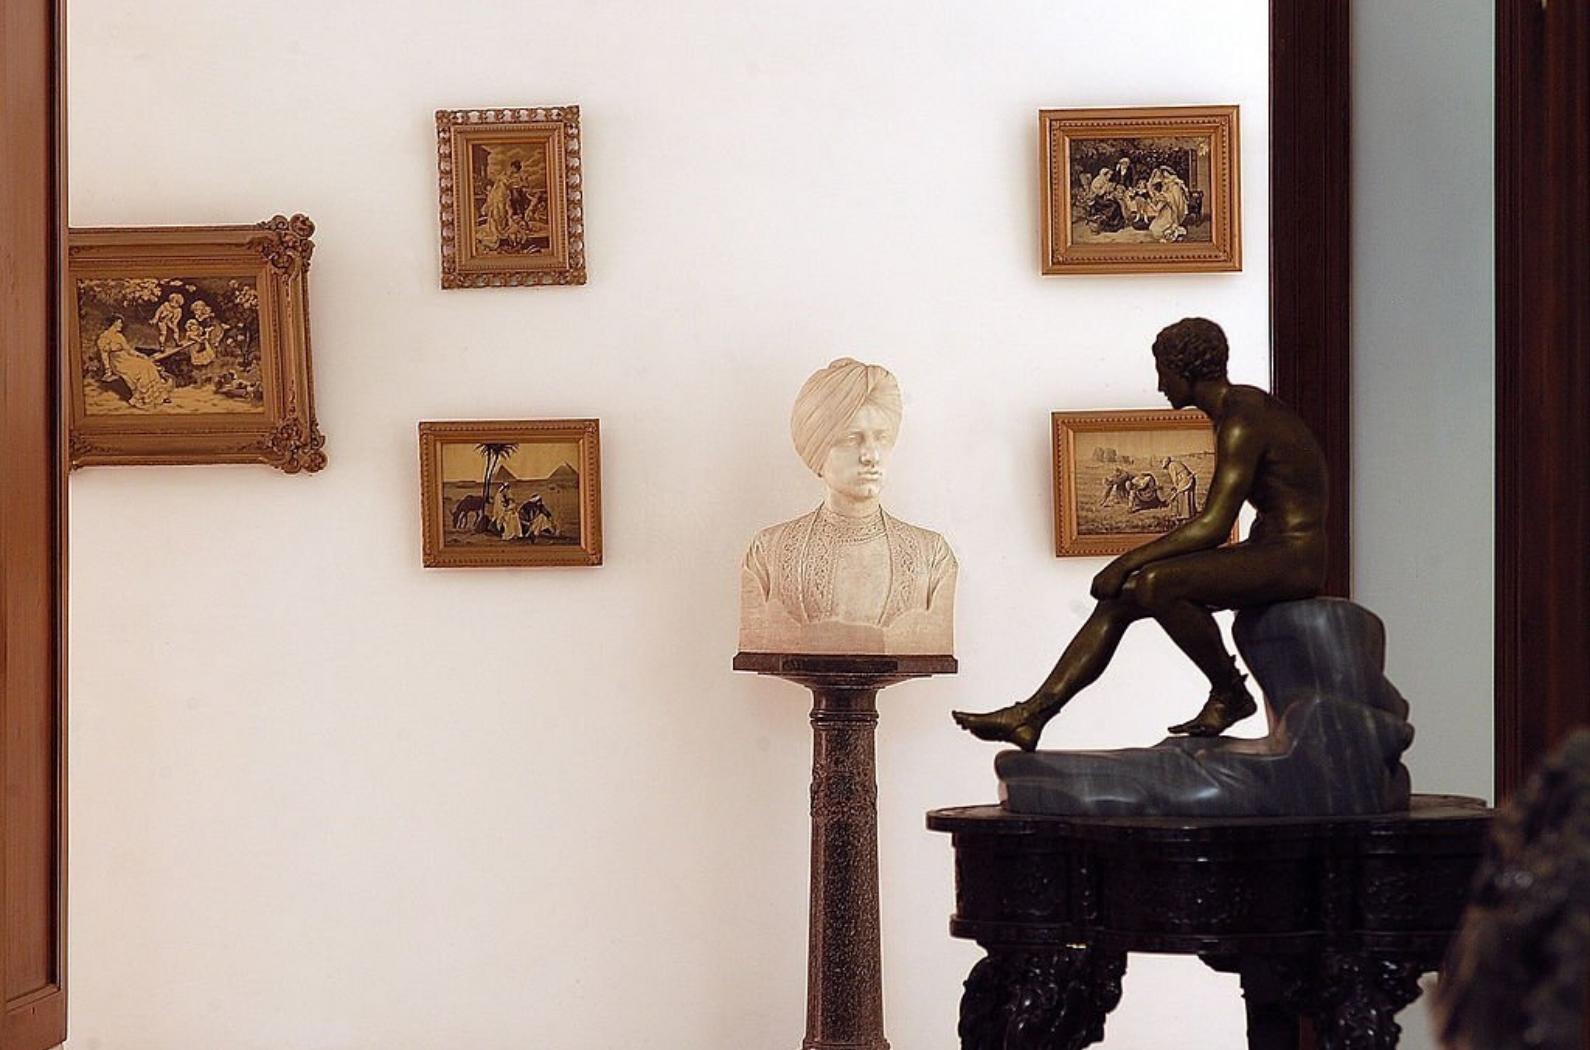 Artifacts and art peices at the New Moti Bagh Palace, Patiala.